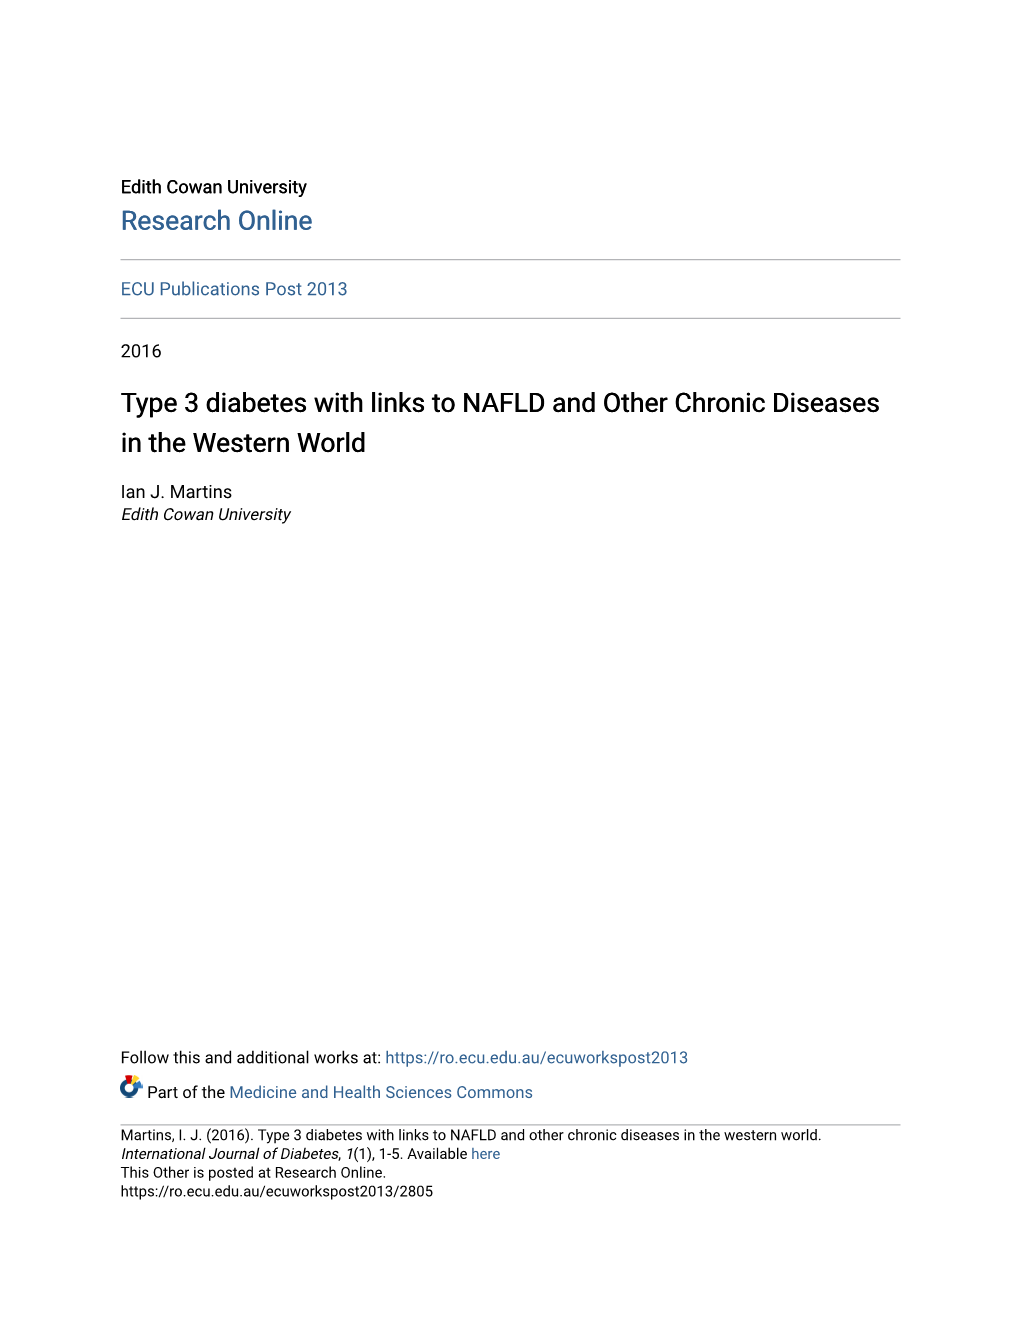 Type 3 Diabetes with Links to NAFLD and Other Chronic Diseases in the Western World